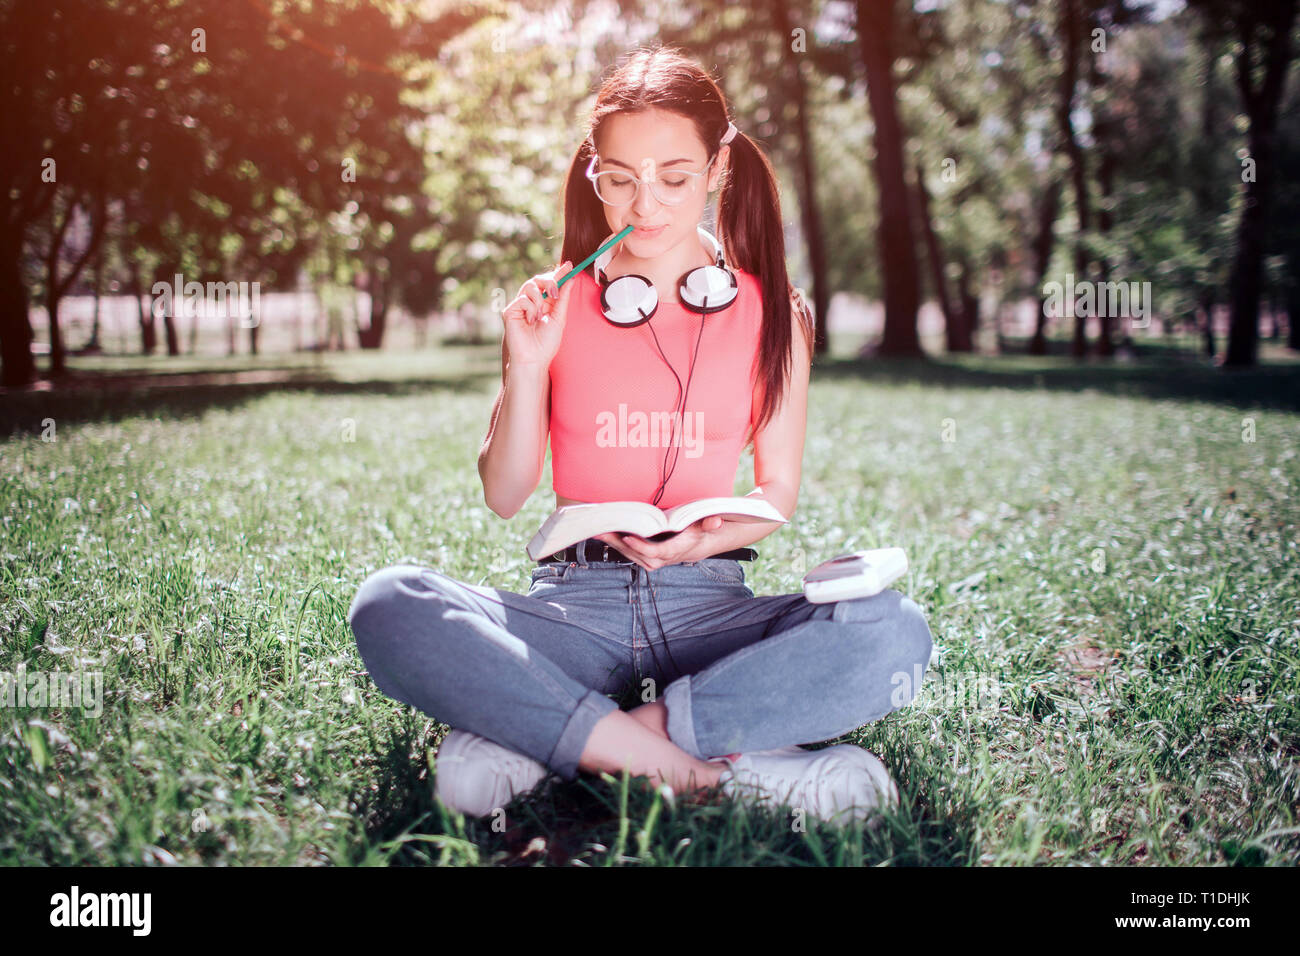 Good and delightful student is sitting on grass and reading a book. She has headphones around her neck. Girl is chewing the end of pencil. Stock Photo